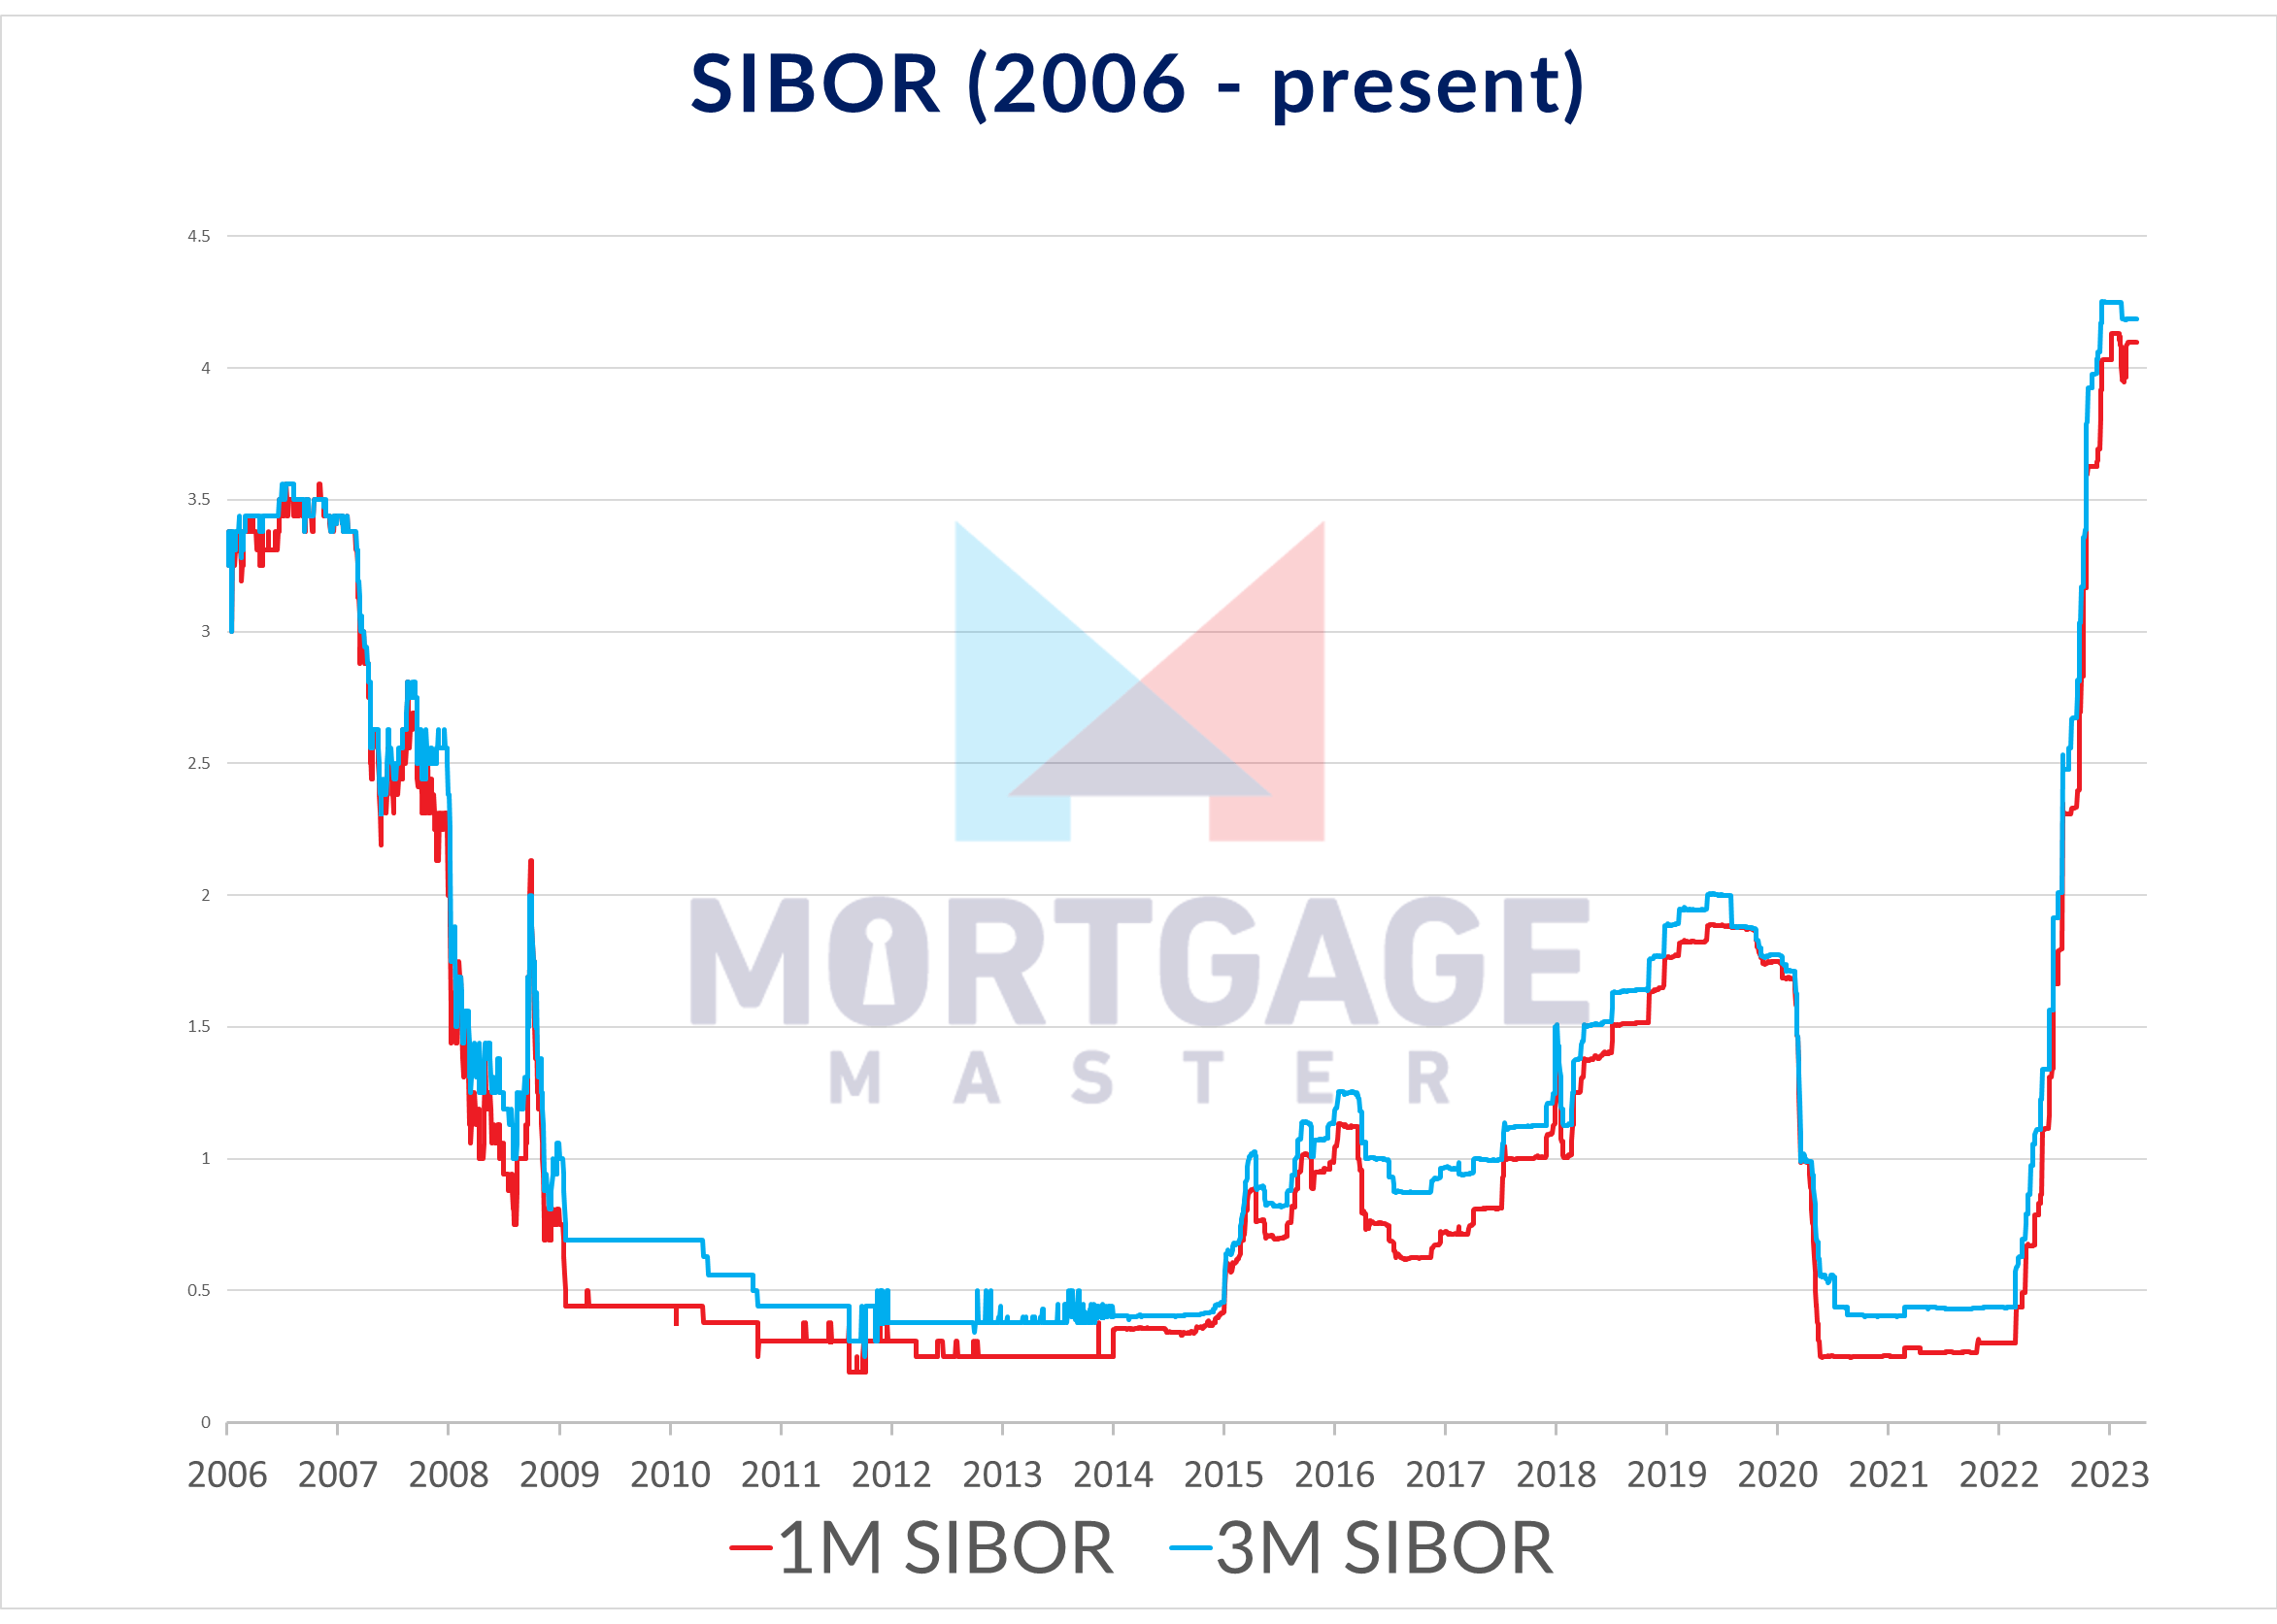 Historical 1M and 3M SIBOR Chart from 2006 to present